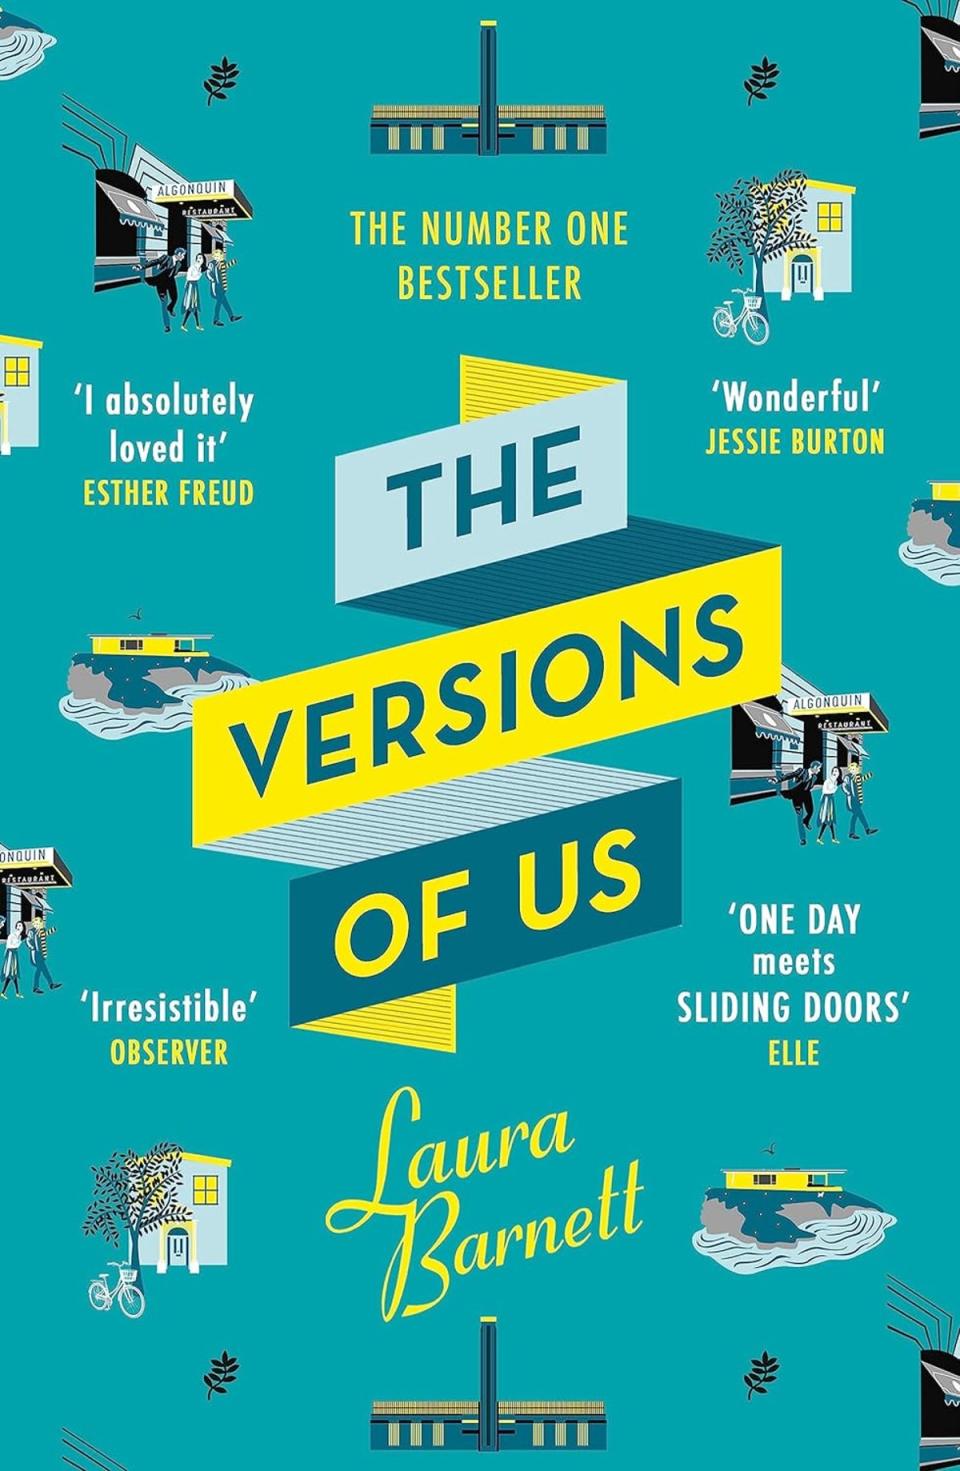 Laura Barnett’s novel explores how a chance meeting can change everything (W&N)